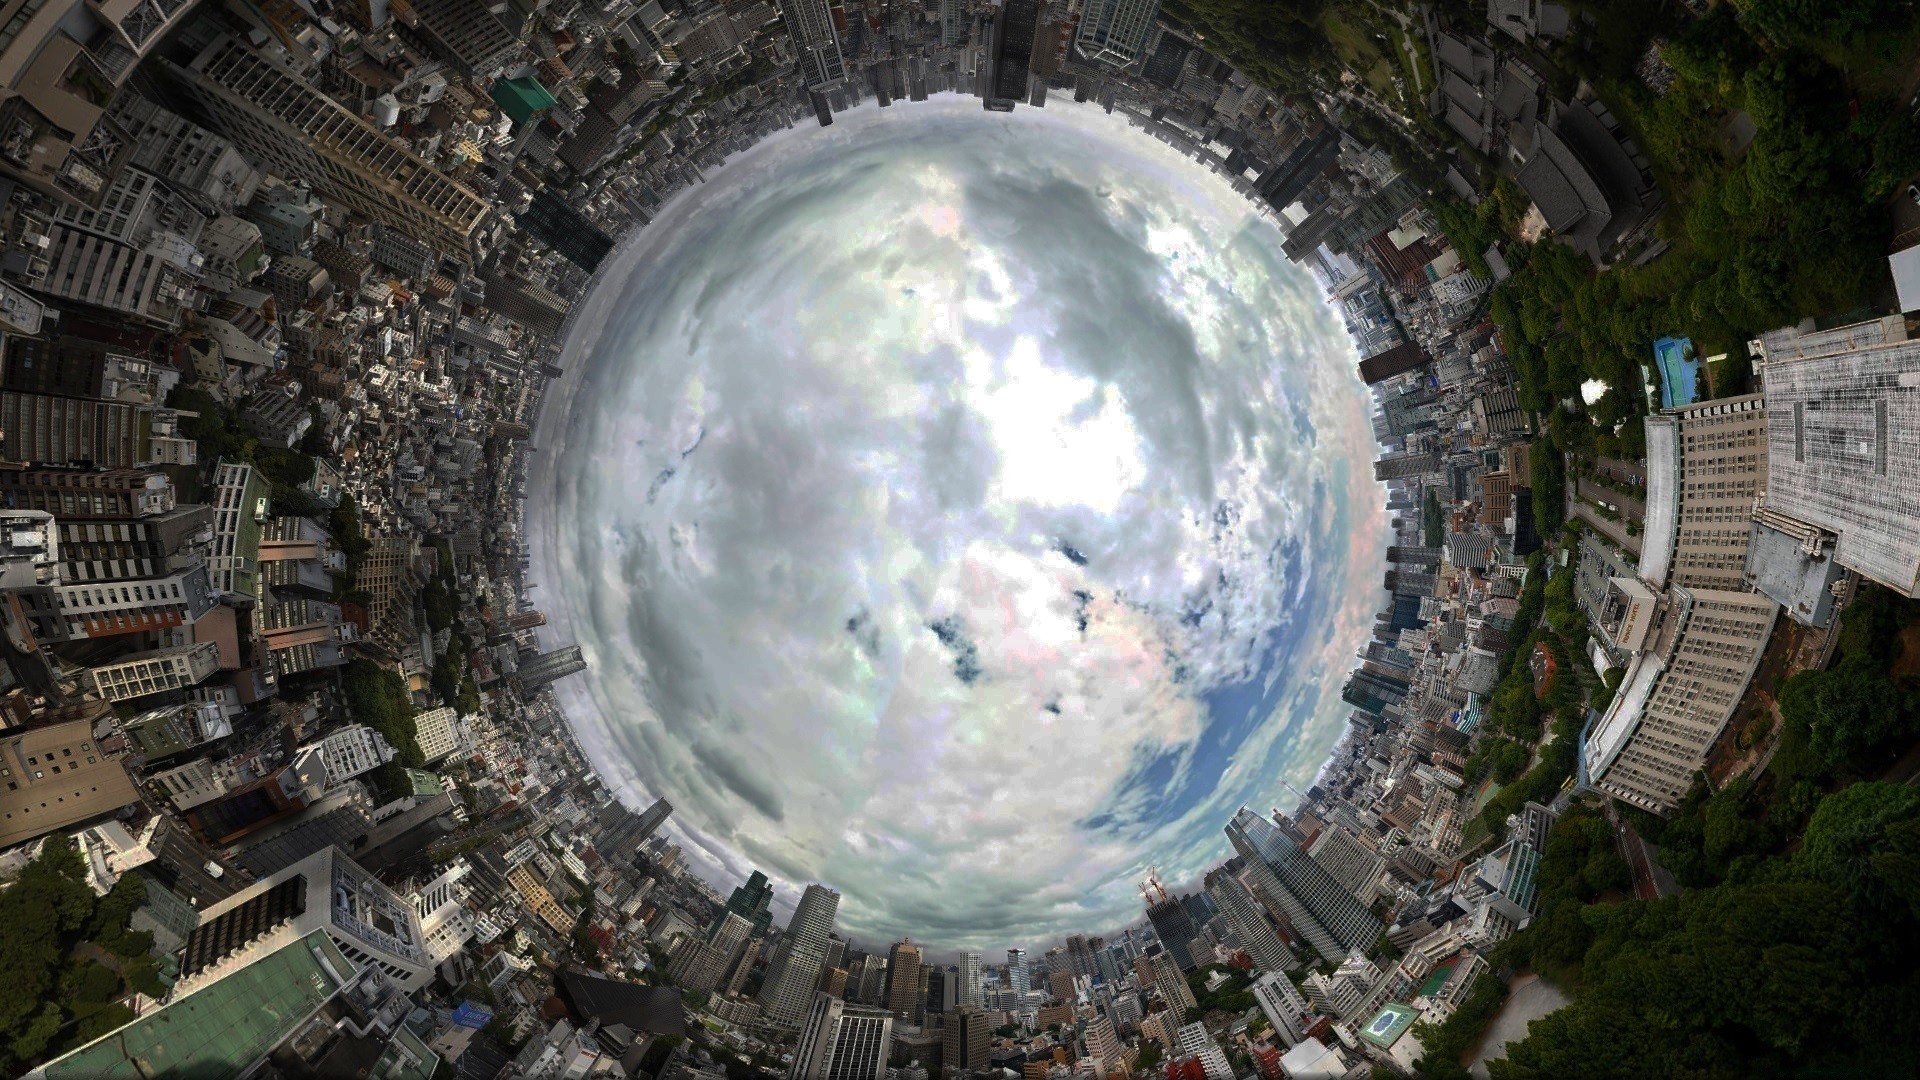 Panoramic Sphere Clouds 1920x1080